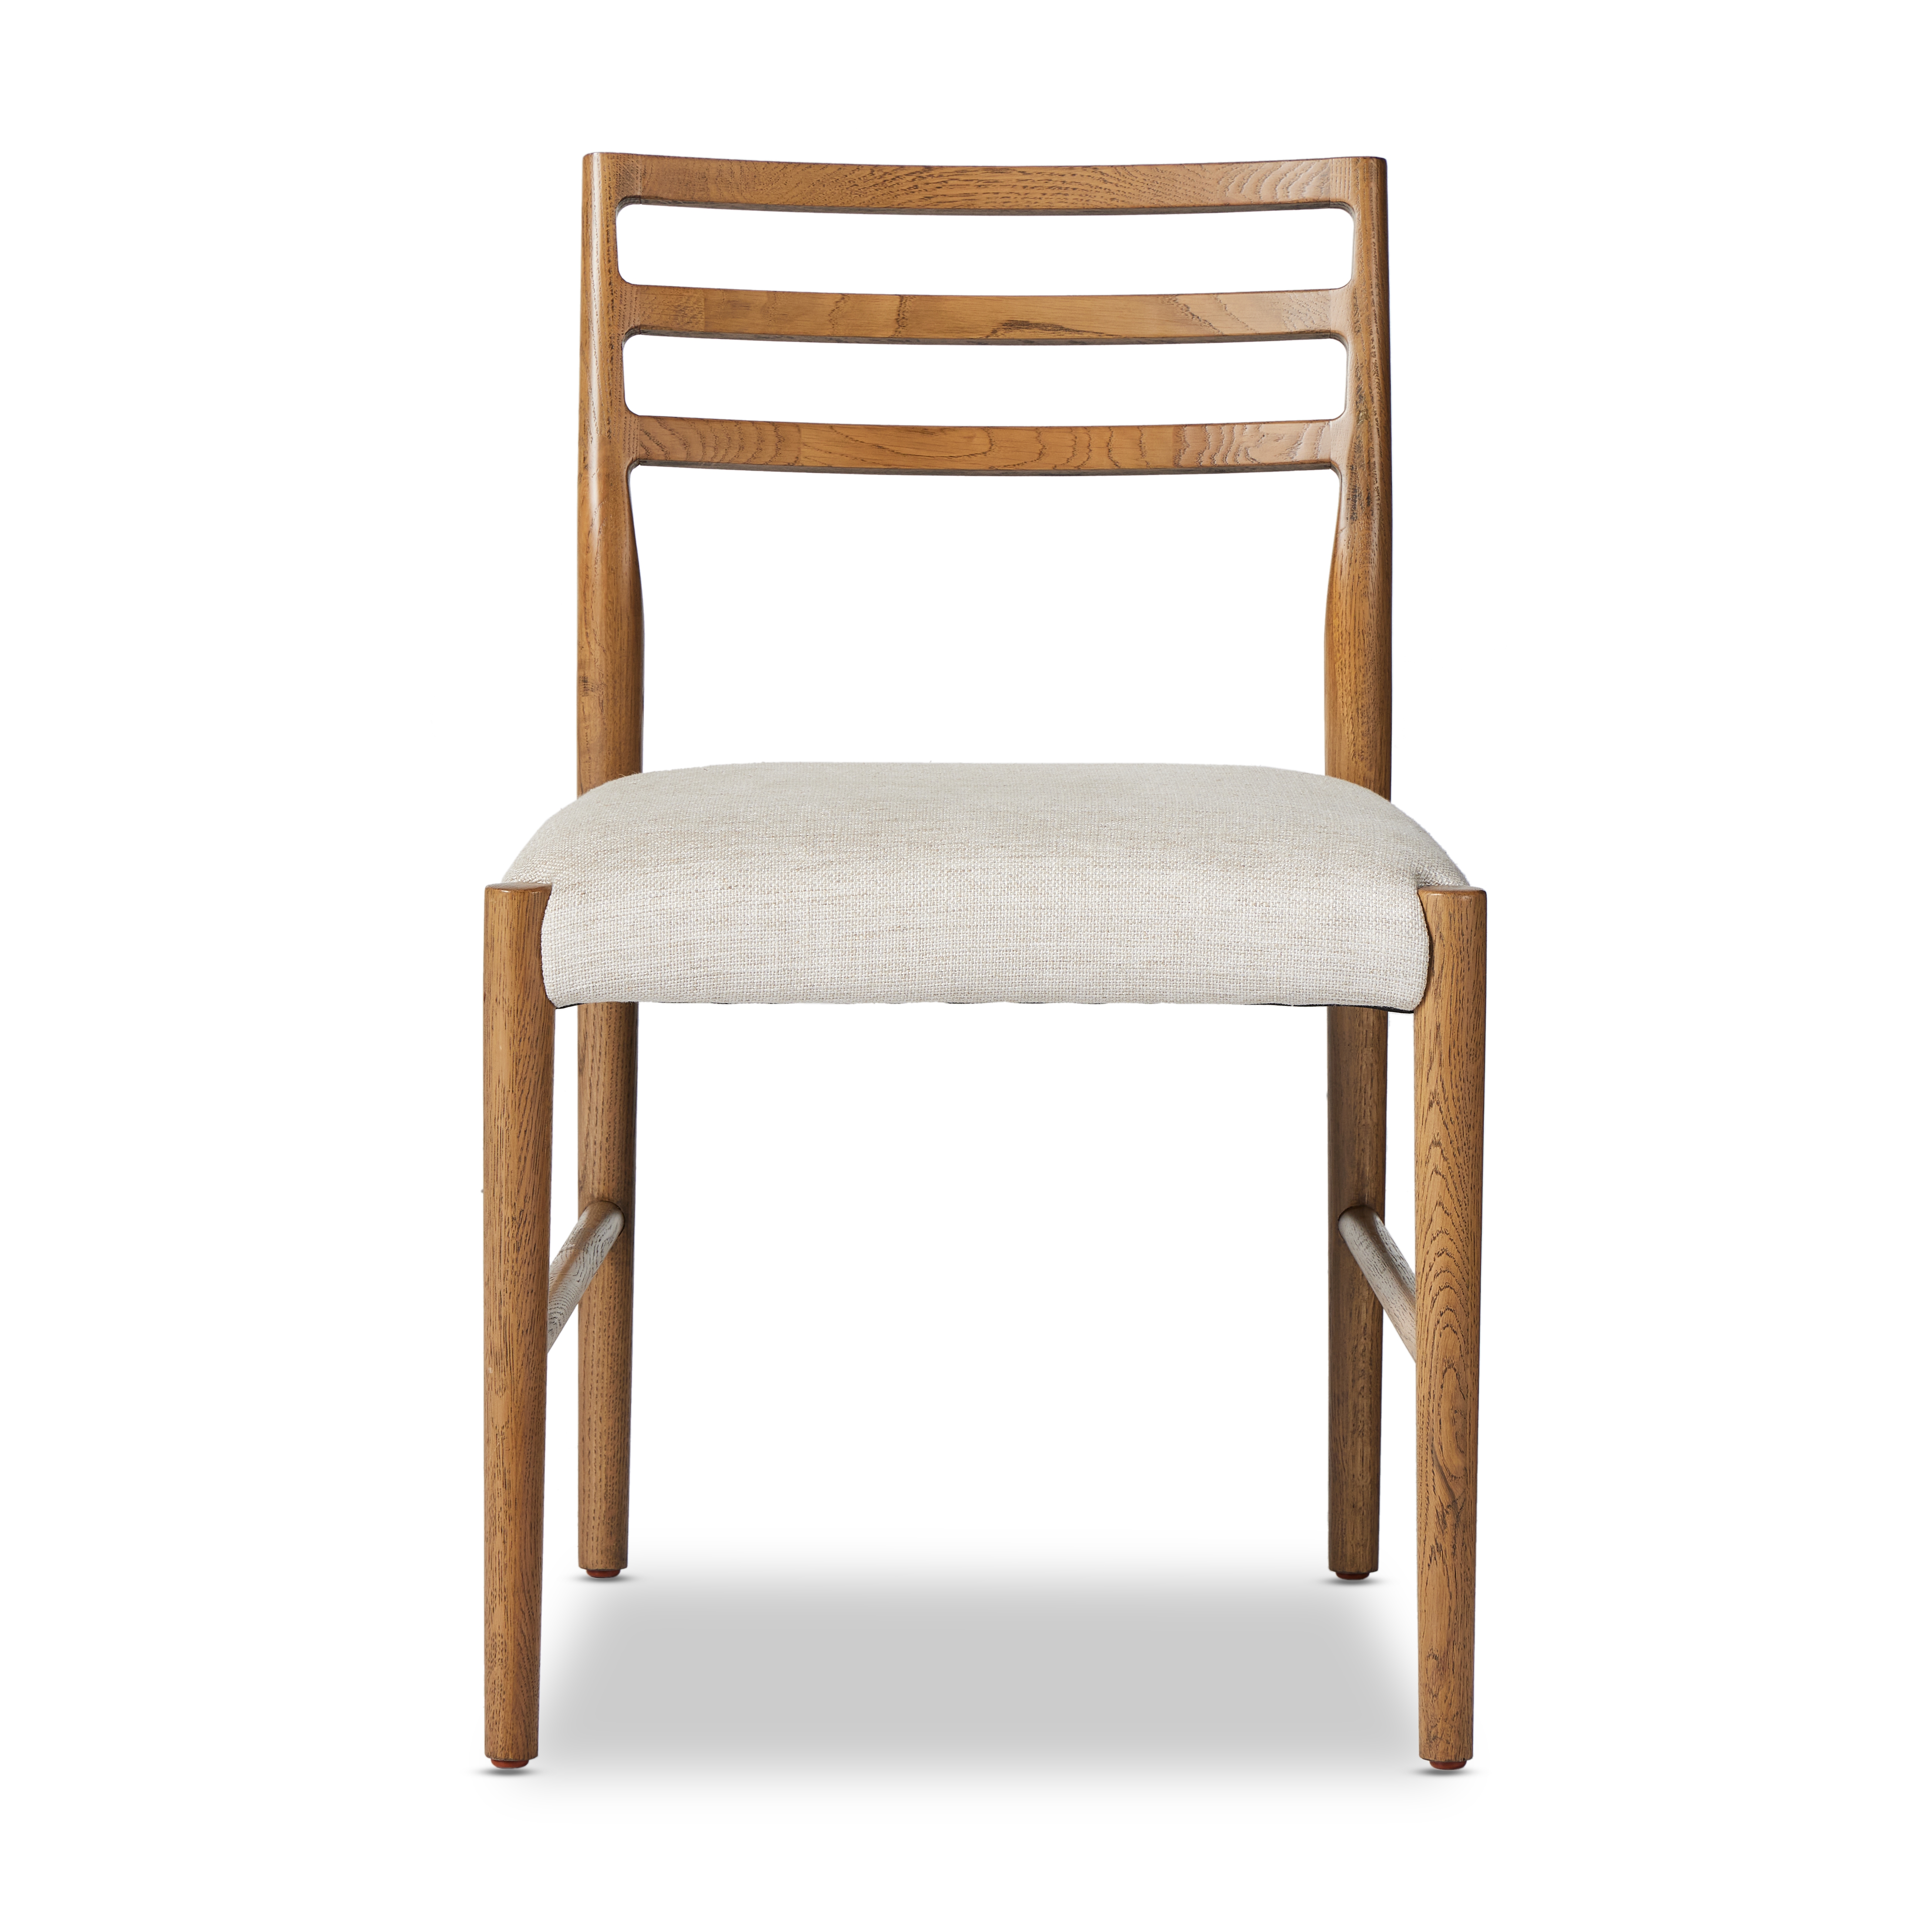 Glenmore Dining Chair-Smoked Oak - Image 3